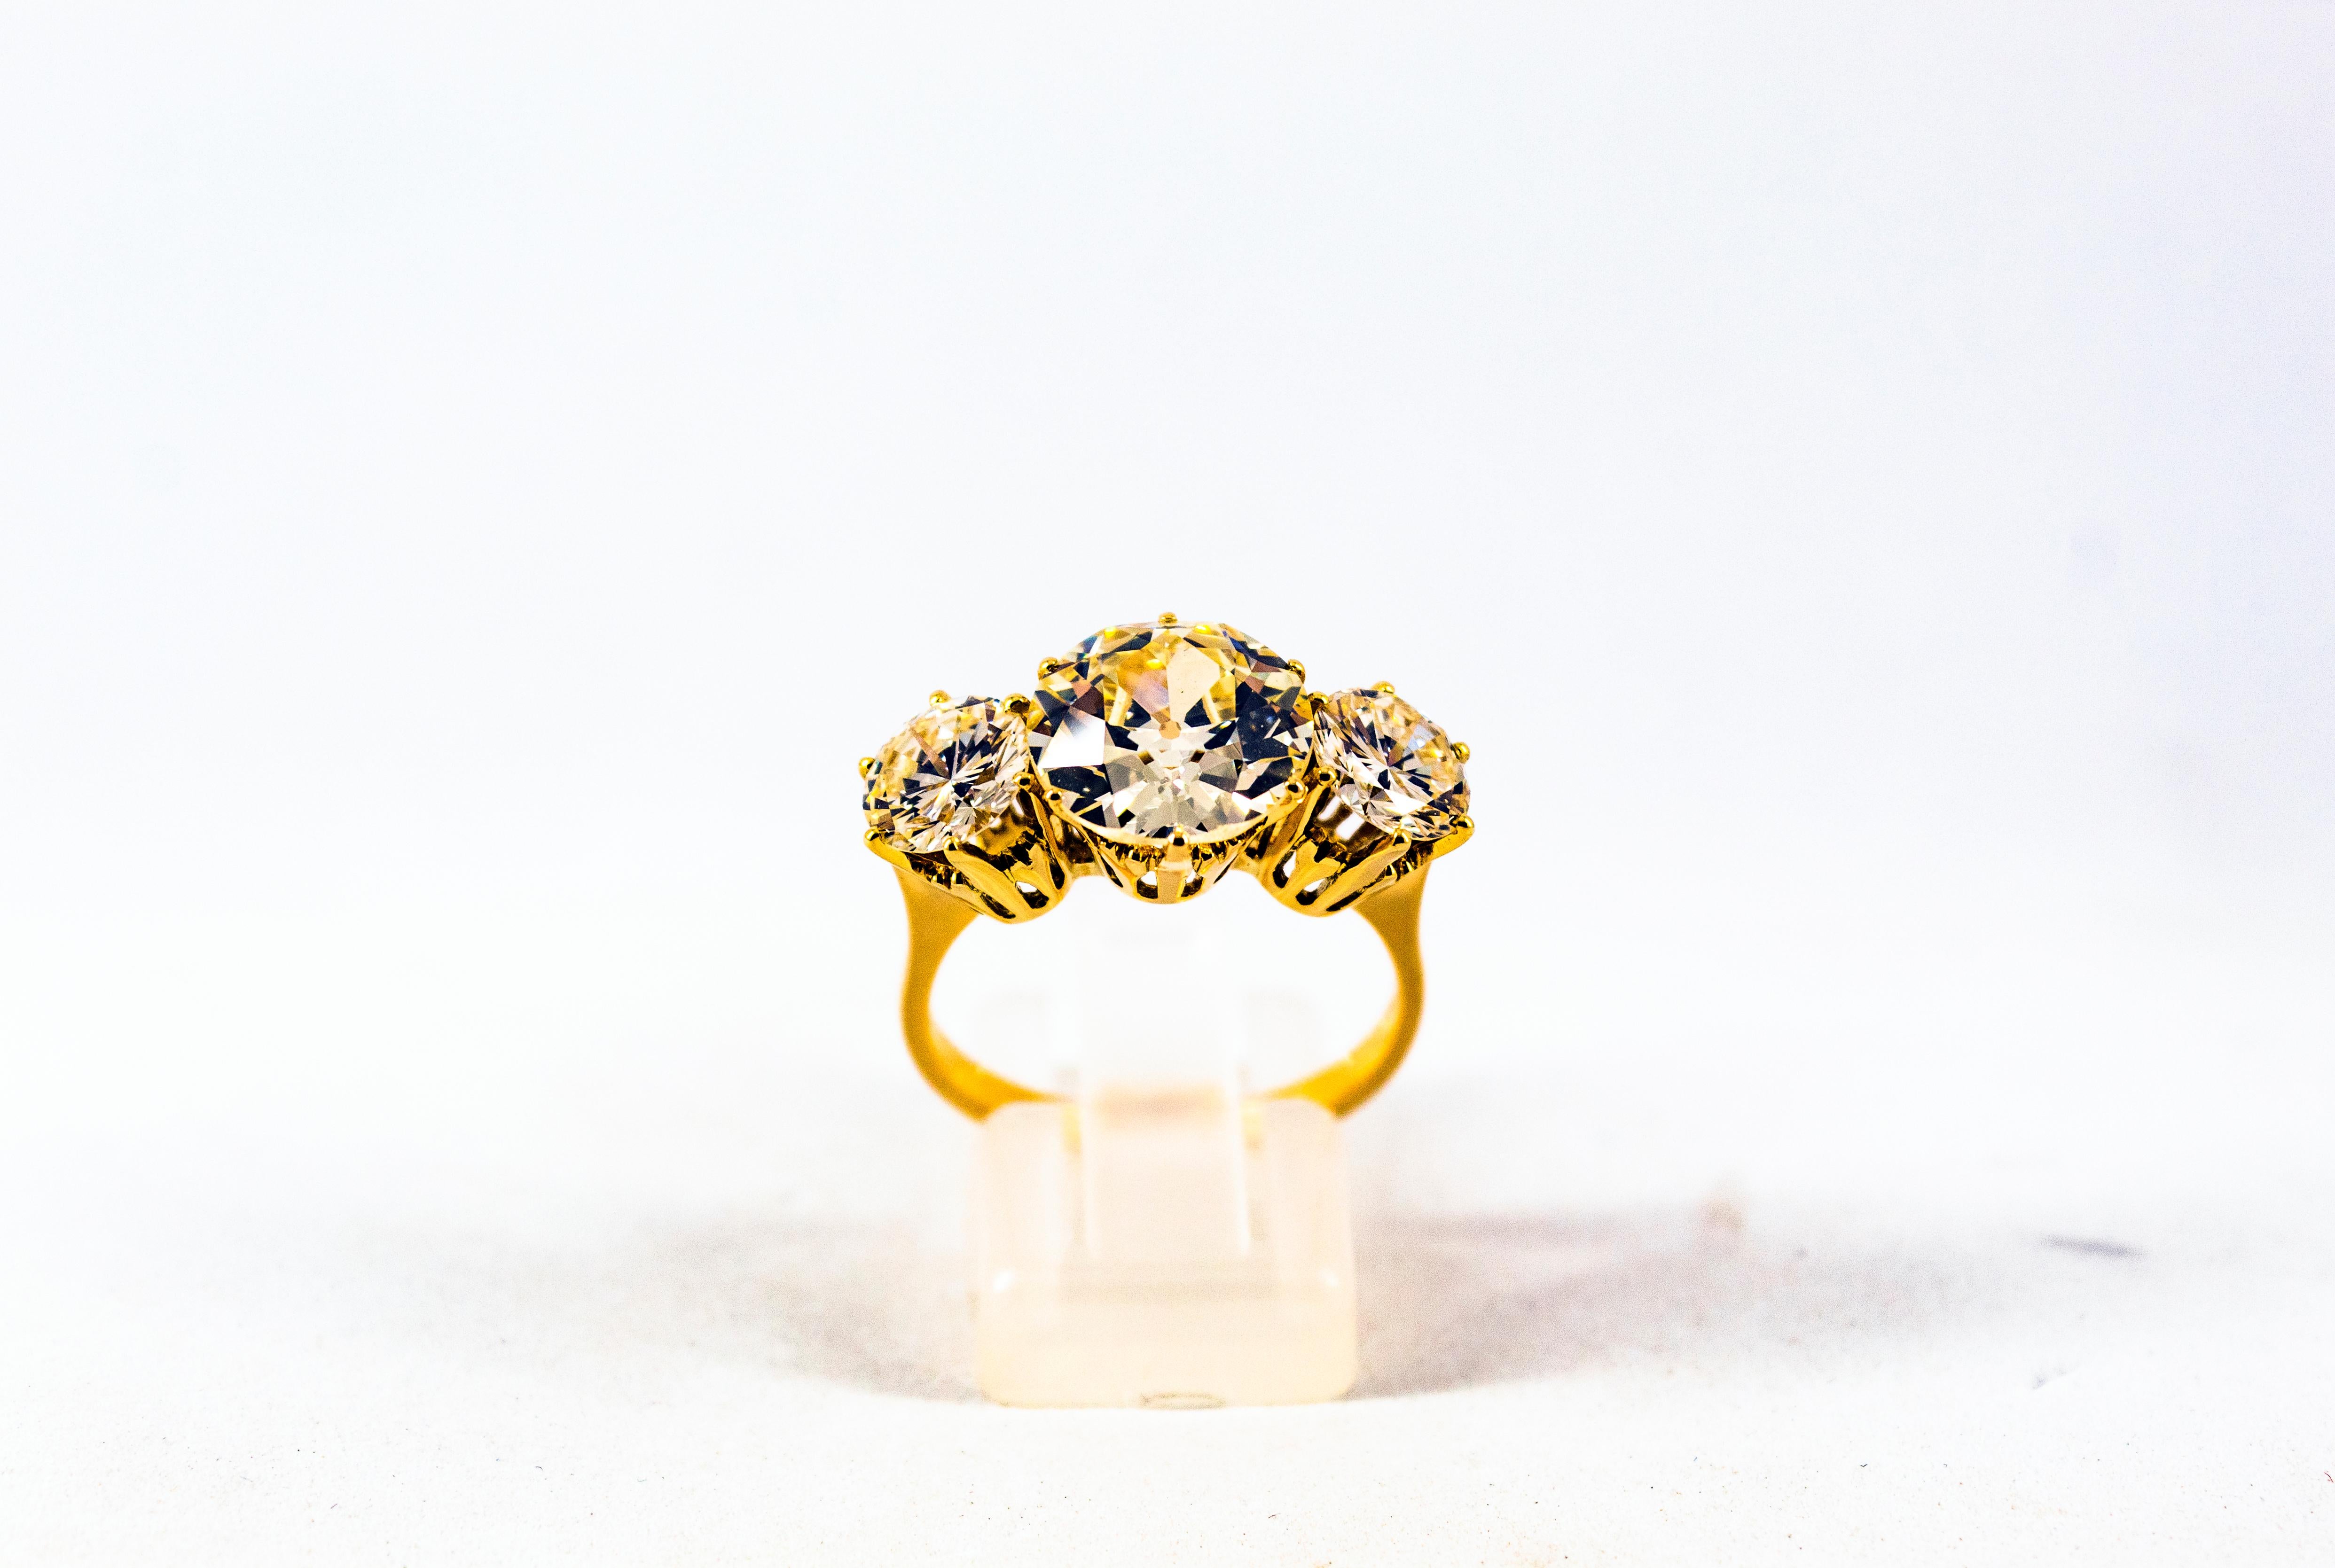 This Ring is made of 18K Yellow Gold.
This Ring has a Central 3.88 Carats White Old European Cut Diamond.
Color: M Clarity: VVS1
This Ring has 2.04 Carats of White Modern Round Cut Diamonds.
They are two 1.02 Carats Diamonds. Color: L Clarity: